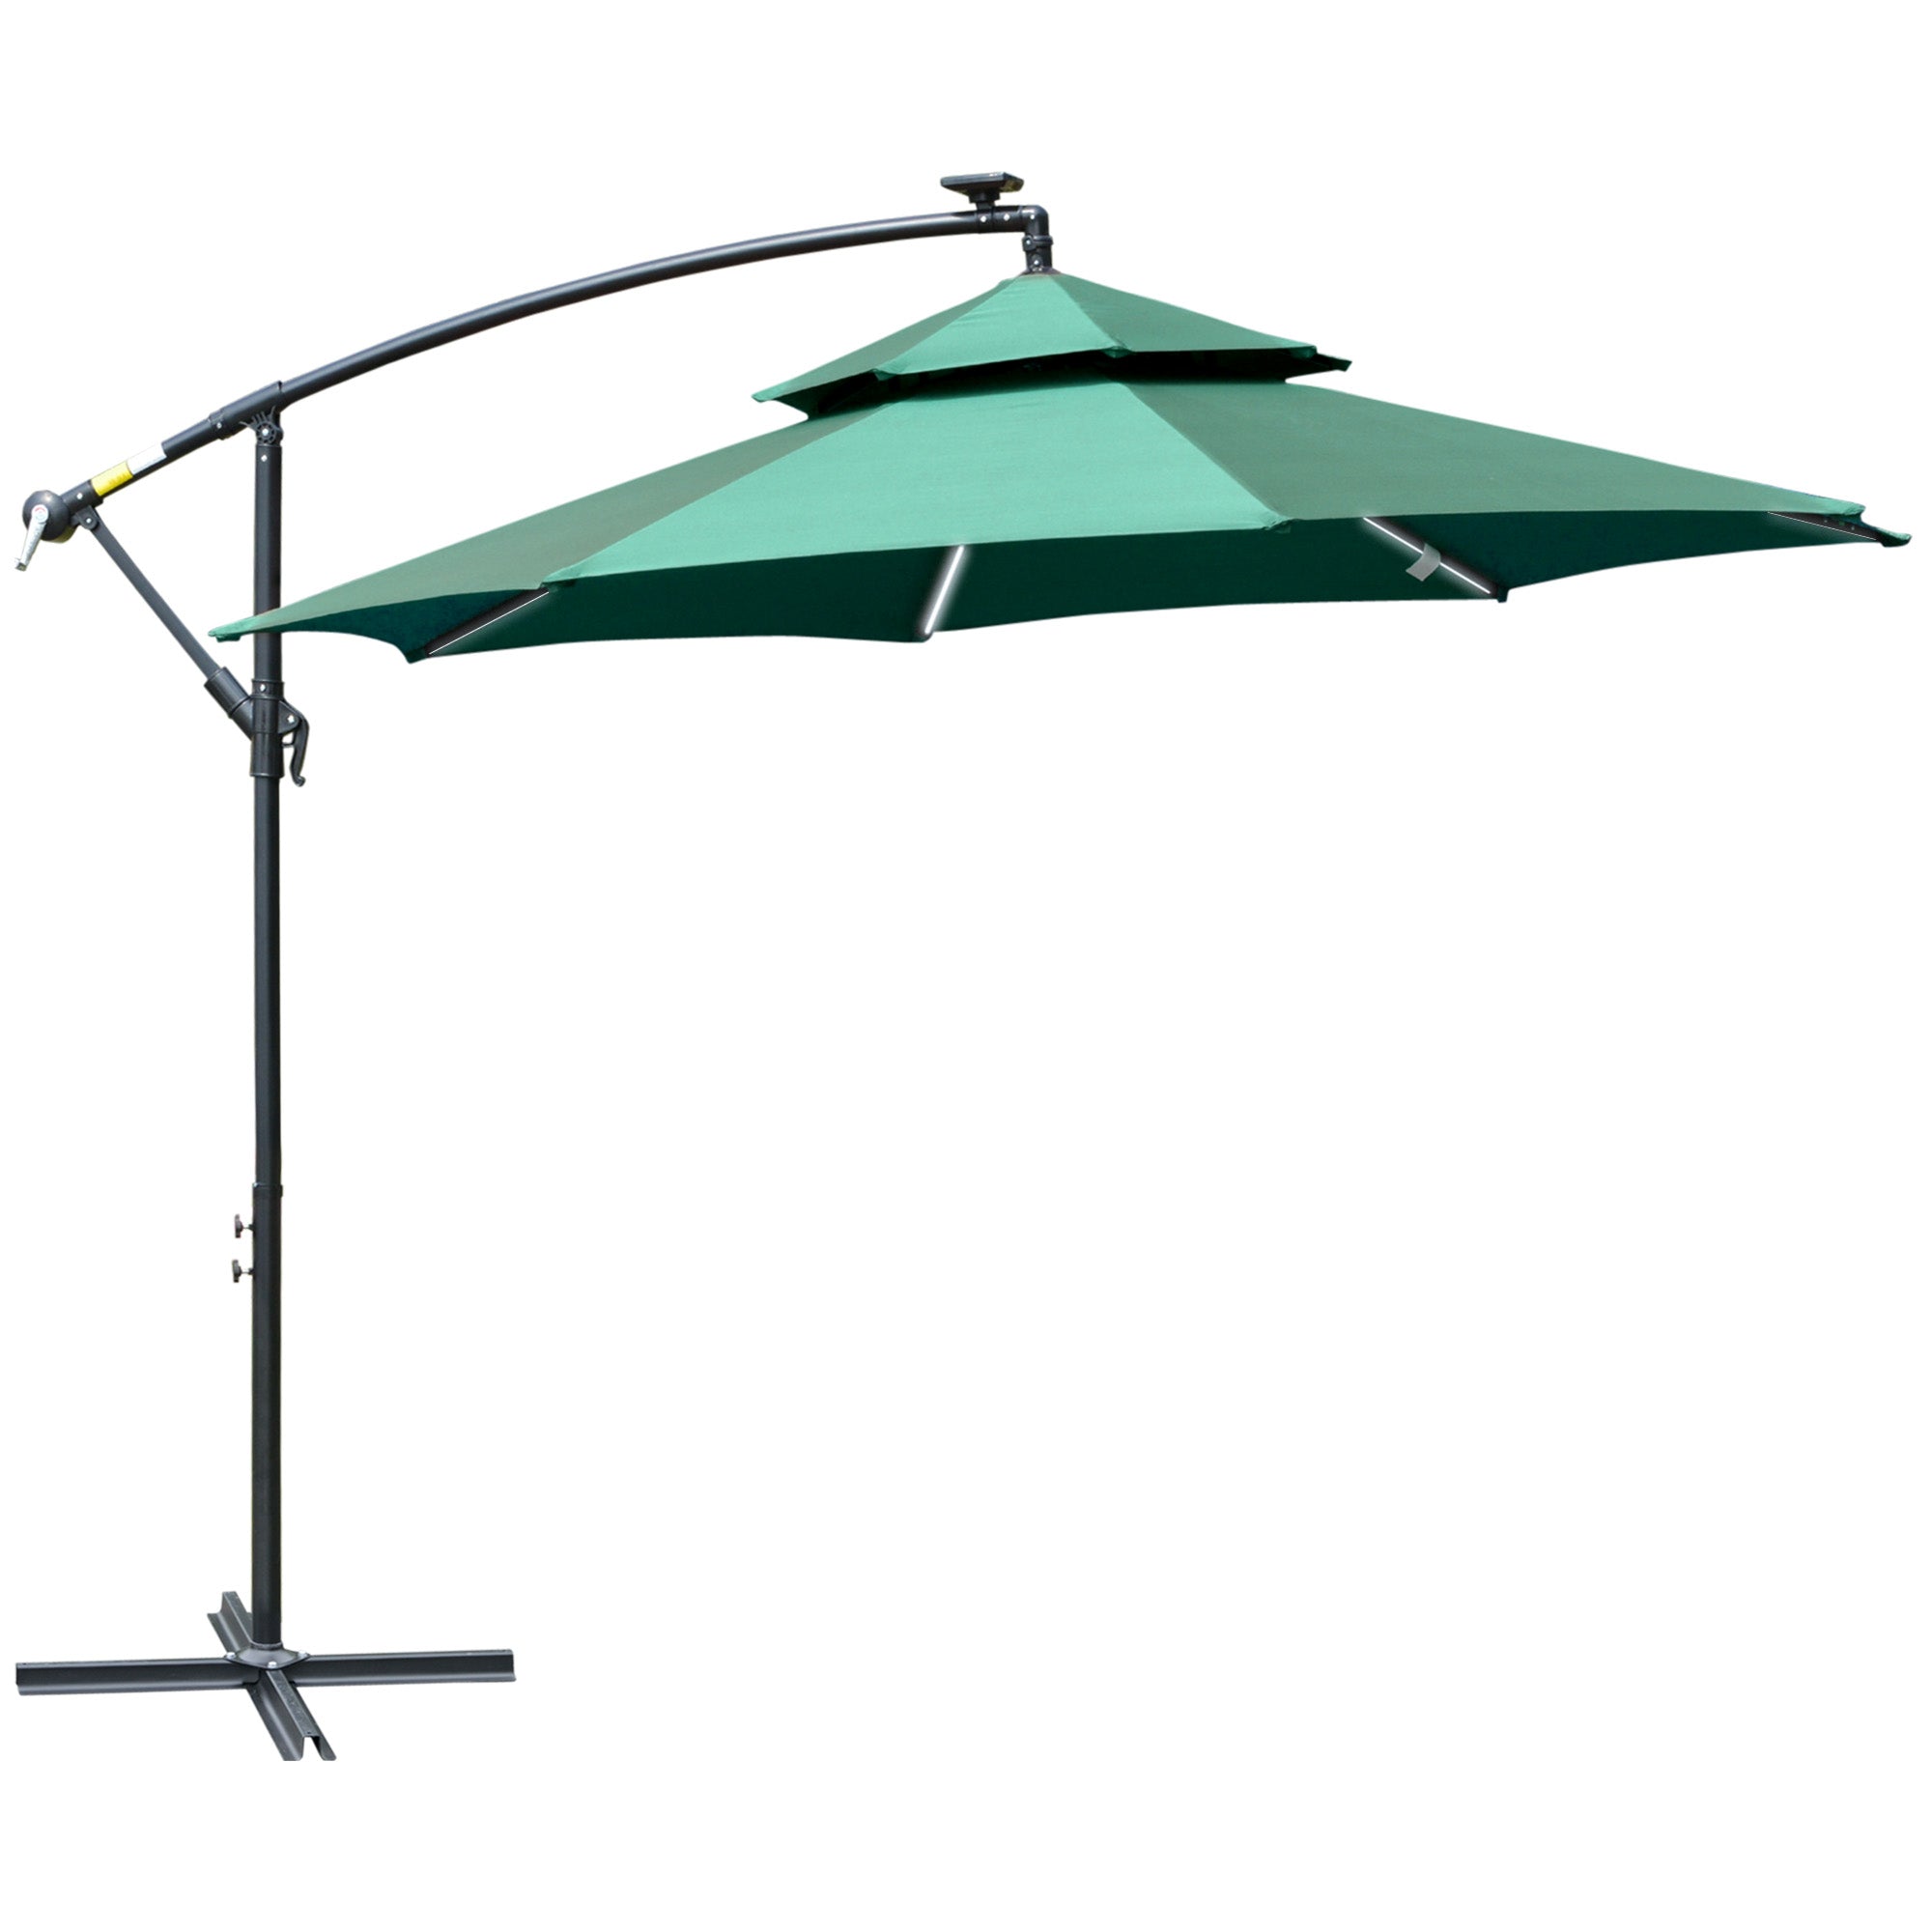 3(m) Cantilever Parasol Banana Hanging Umbrella with Double Roof, LED Solar lights, Crank, 8 Sturdy Ribs and Cross Base Green-0